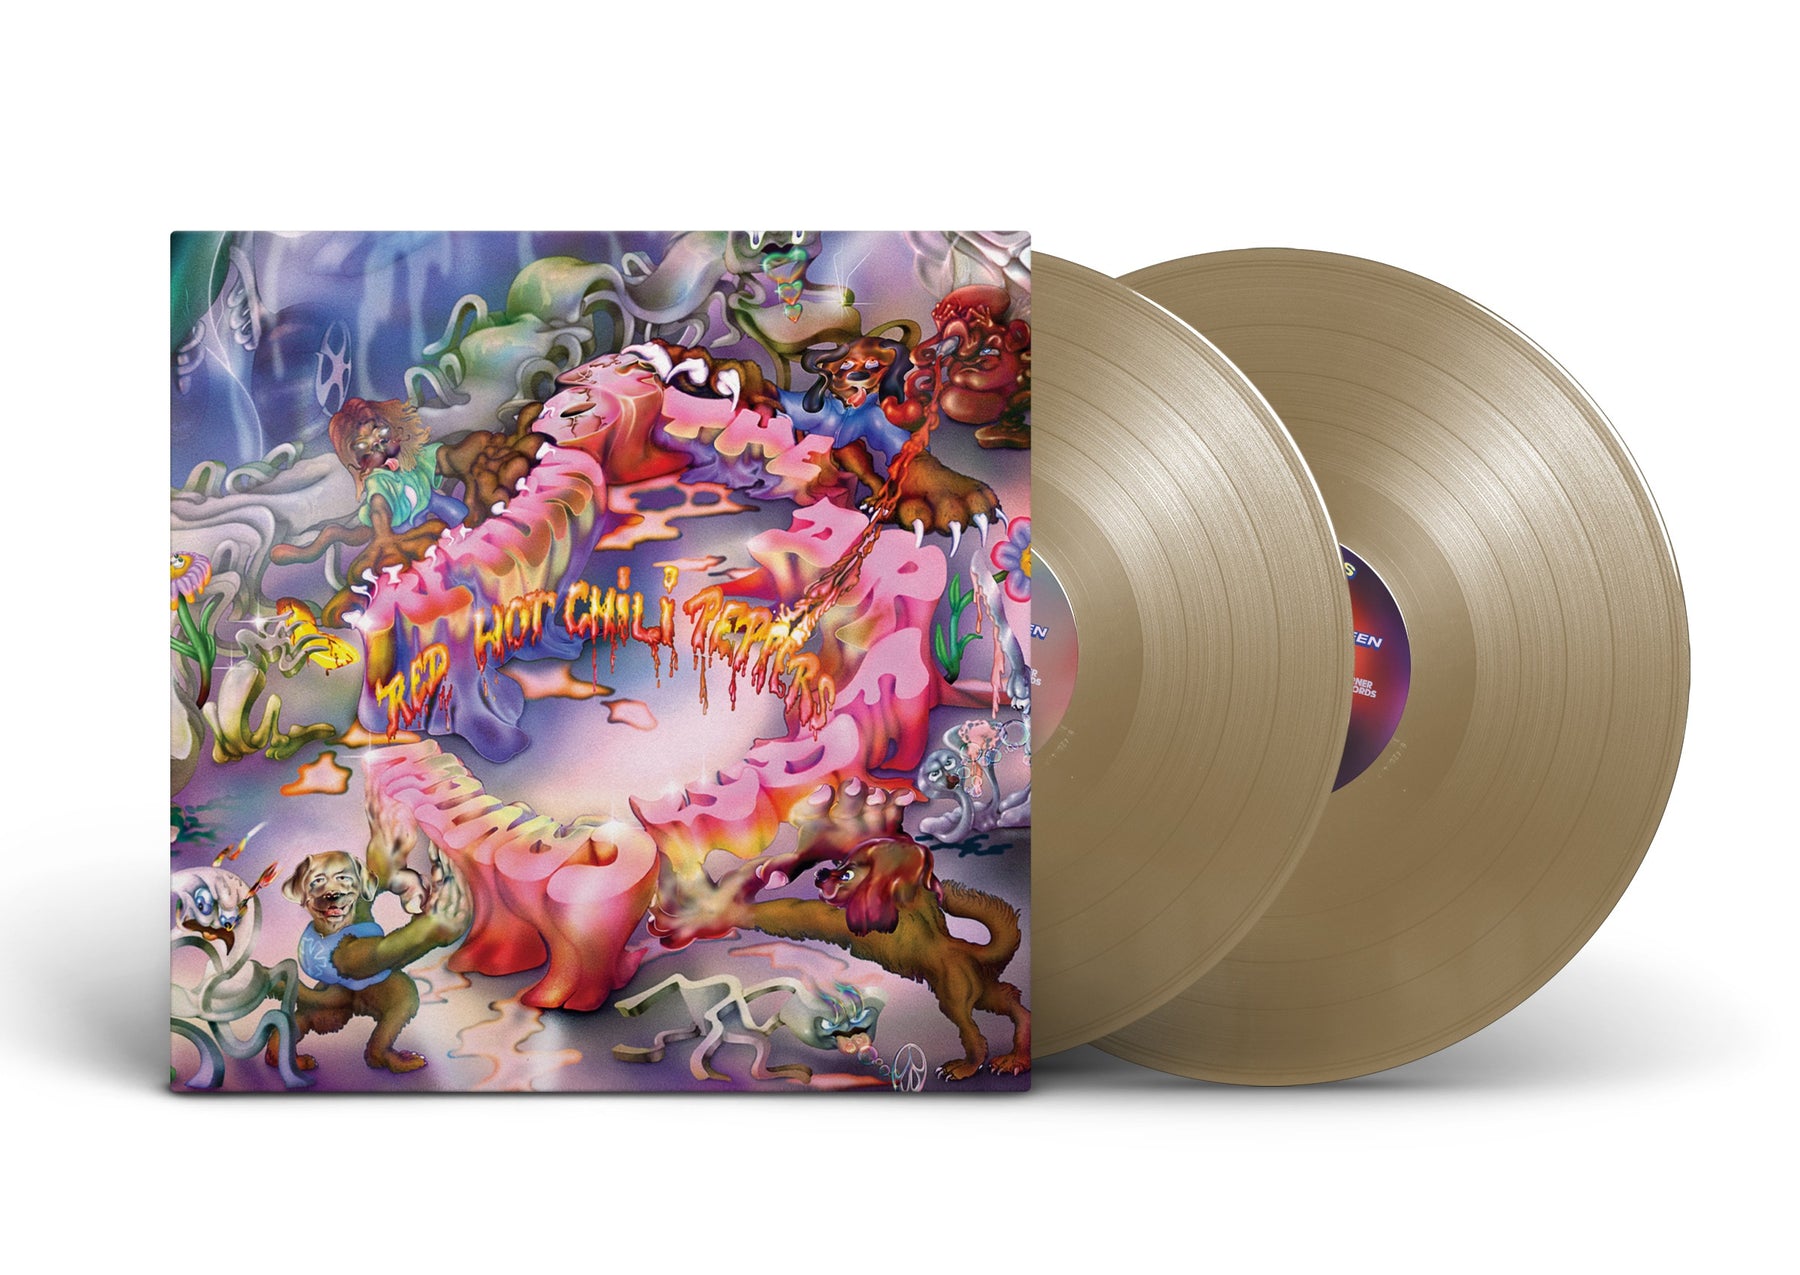 Red Hot Chili Peppers - Return of the Dream Canteen 2LP (Indie Exclusive Gold Vinyl)